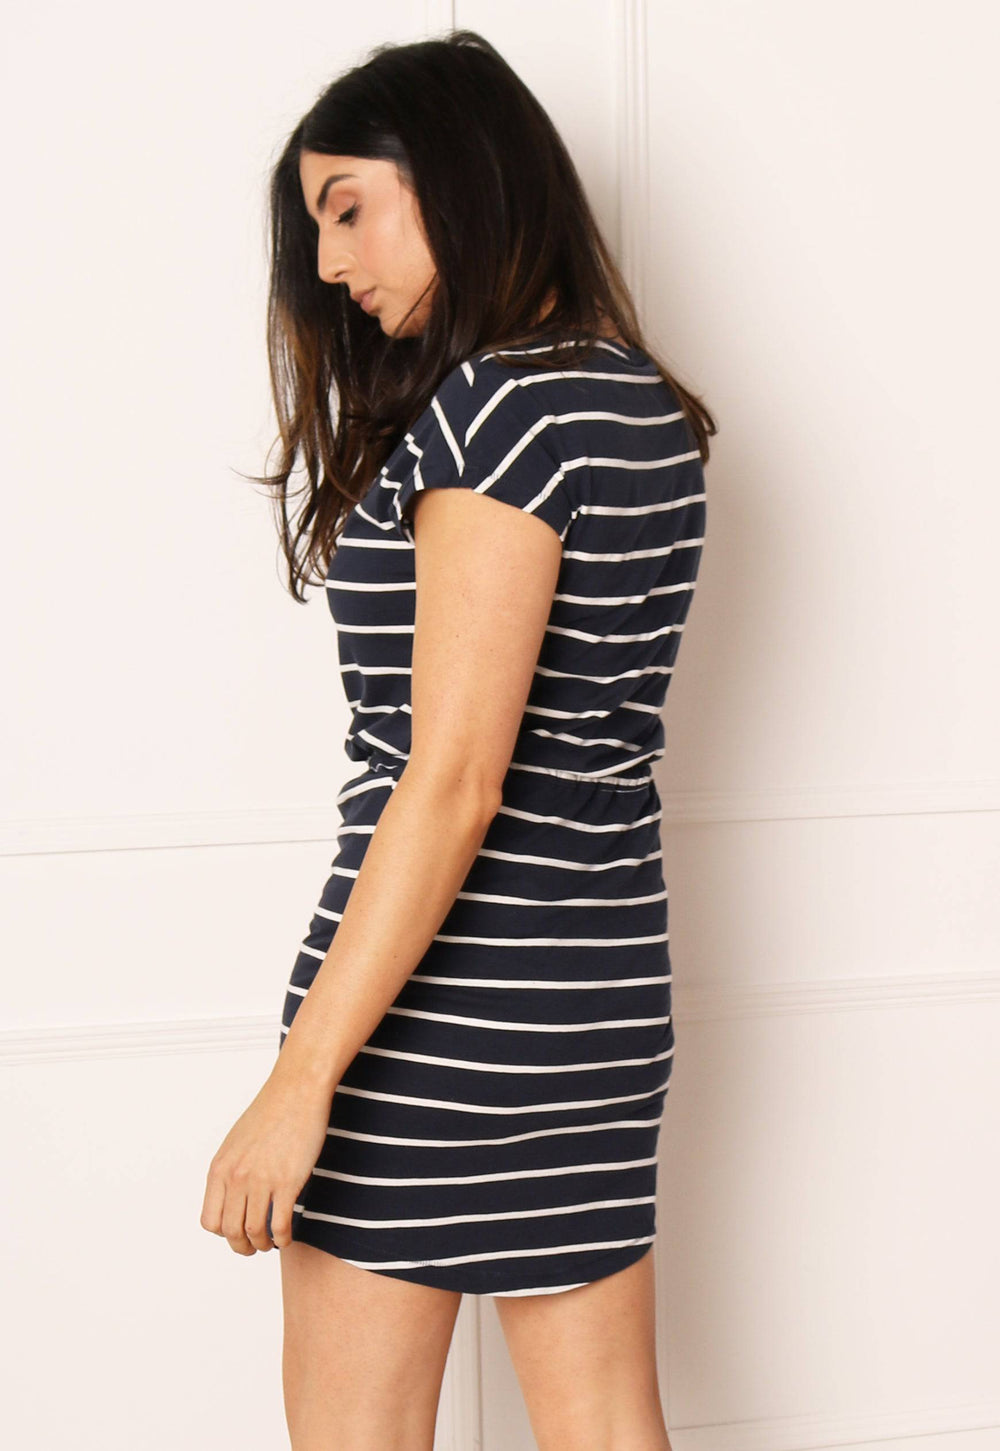 ONLY Basic Stripe Jersey T-shirt Mini Summer Dress in Navy & White  One  Nation Clothing ONLY Basic Stripe Jersey T-shirt Mini Summer Dress in Navy  & White